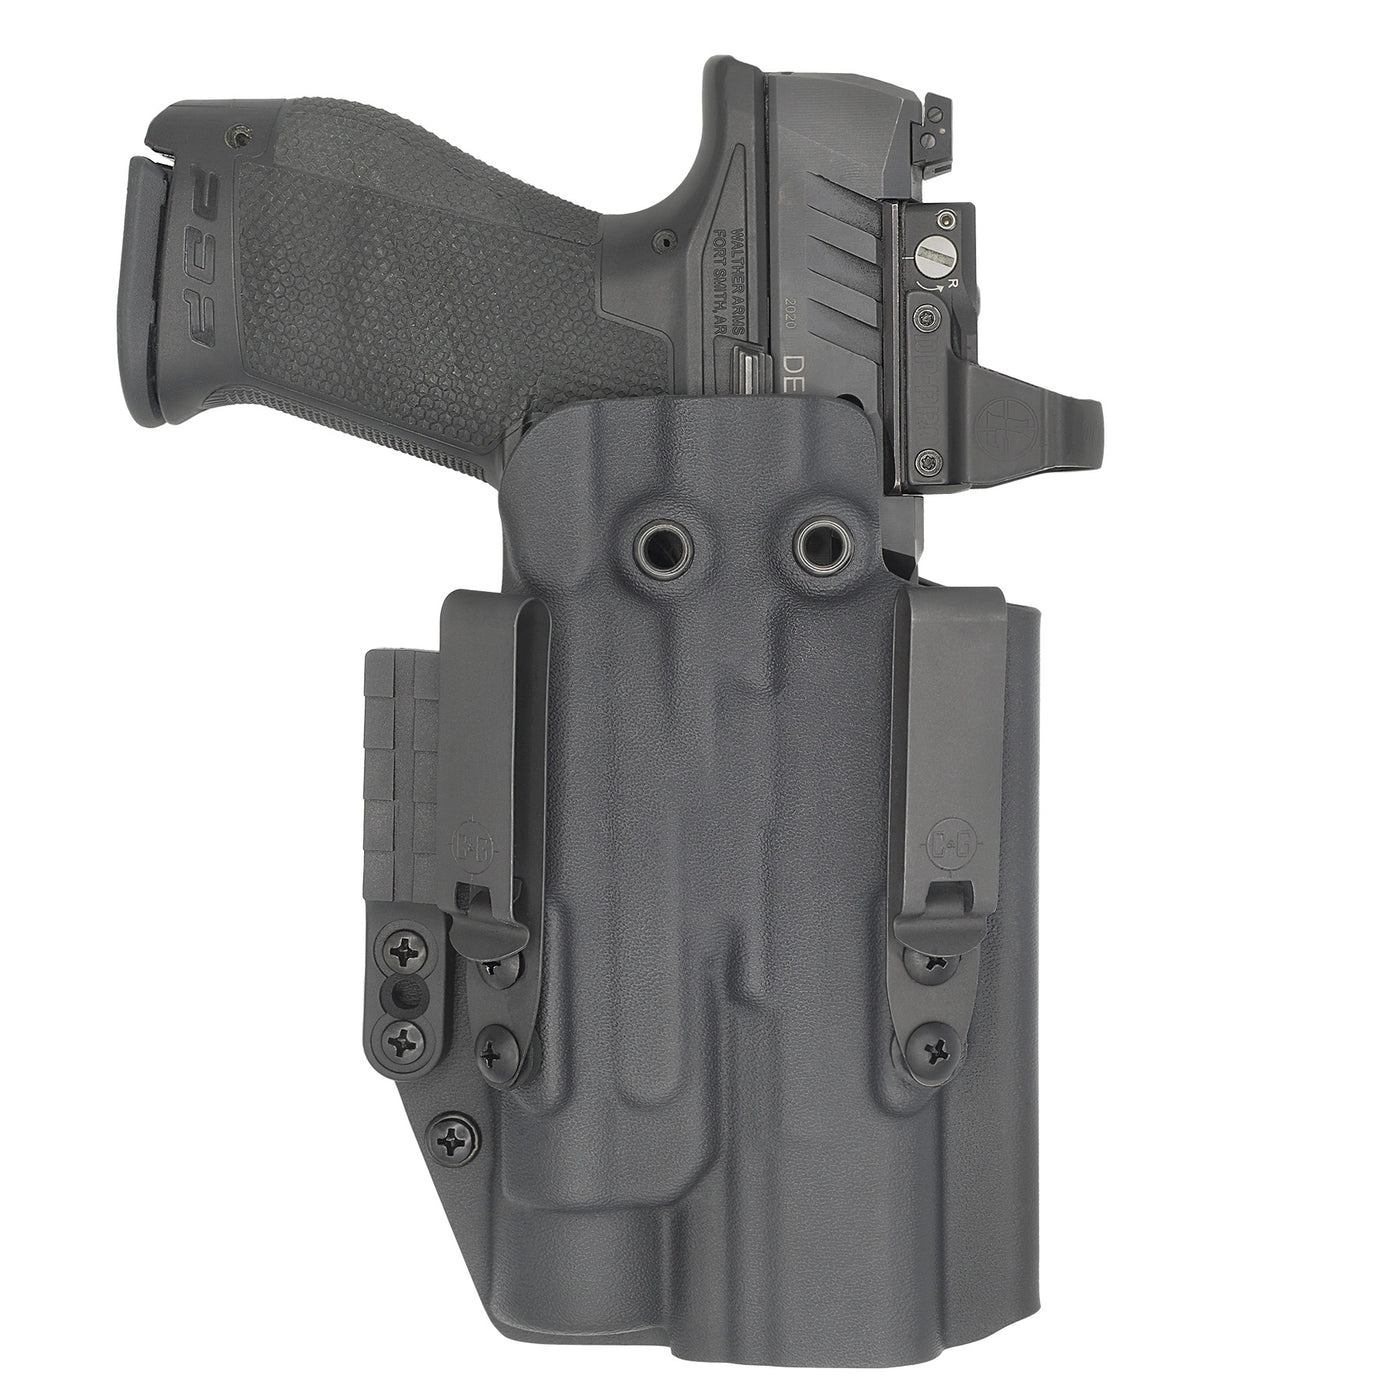 C&G Holsters quickship IWB Tactical ALPHA UPGRADE CZ P07/9 TLR1 in holstered position